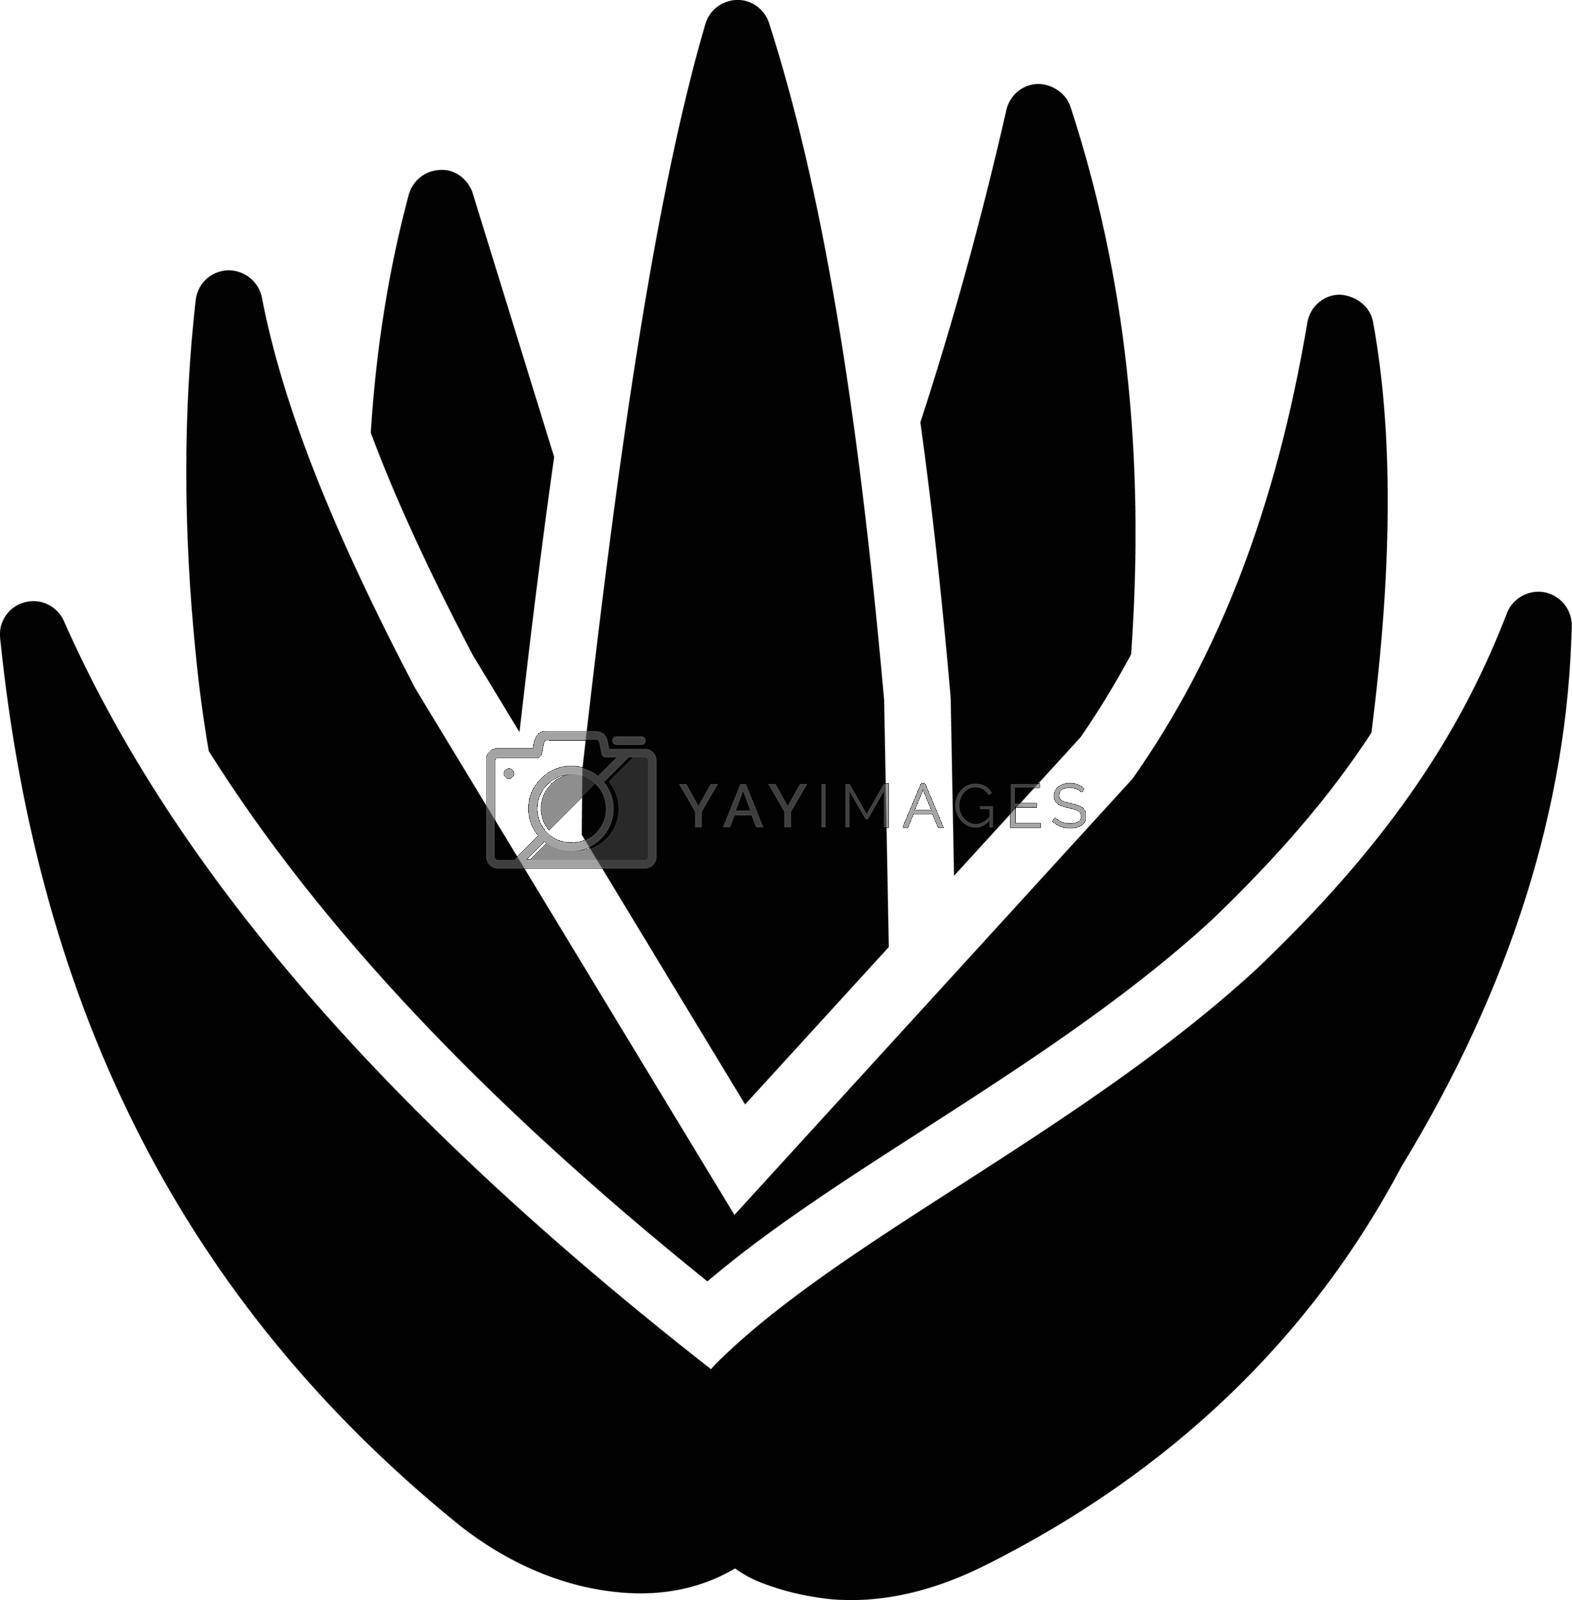 spa Vector illustration on a transparent background. Premium quality symmbols. Glyphs vector icons for concept and graphic design.